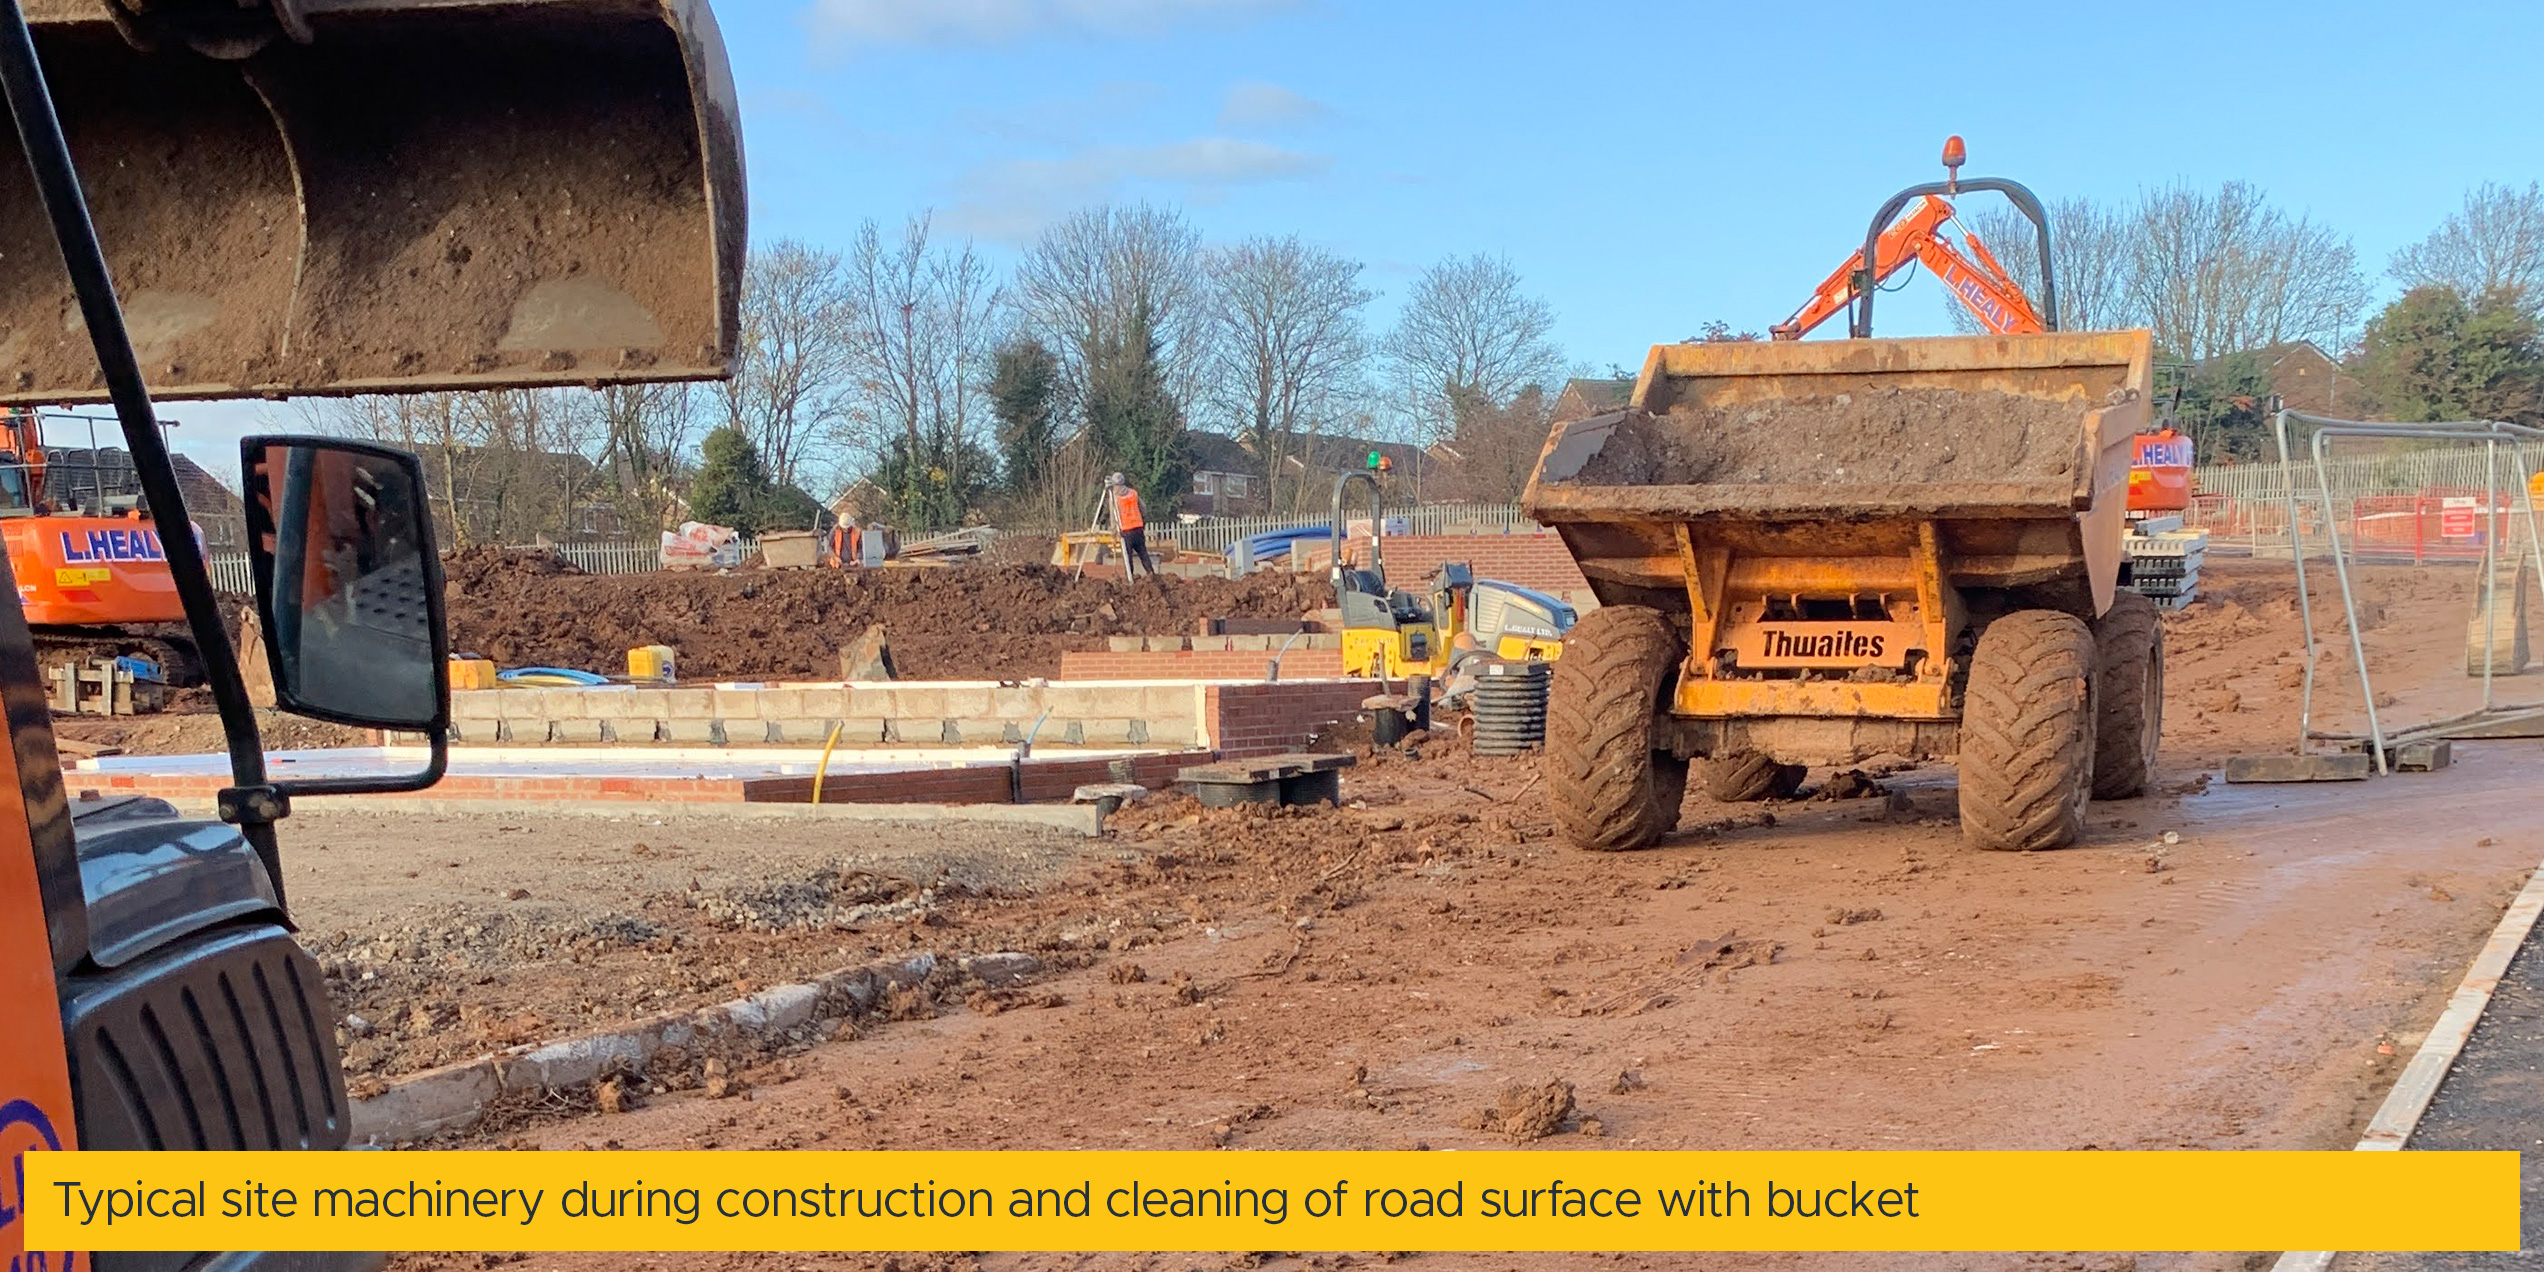 Typical site machinery during construction and cleaning of road surface with bucket